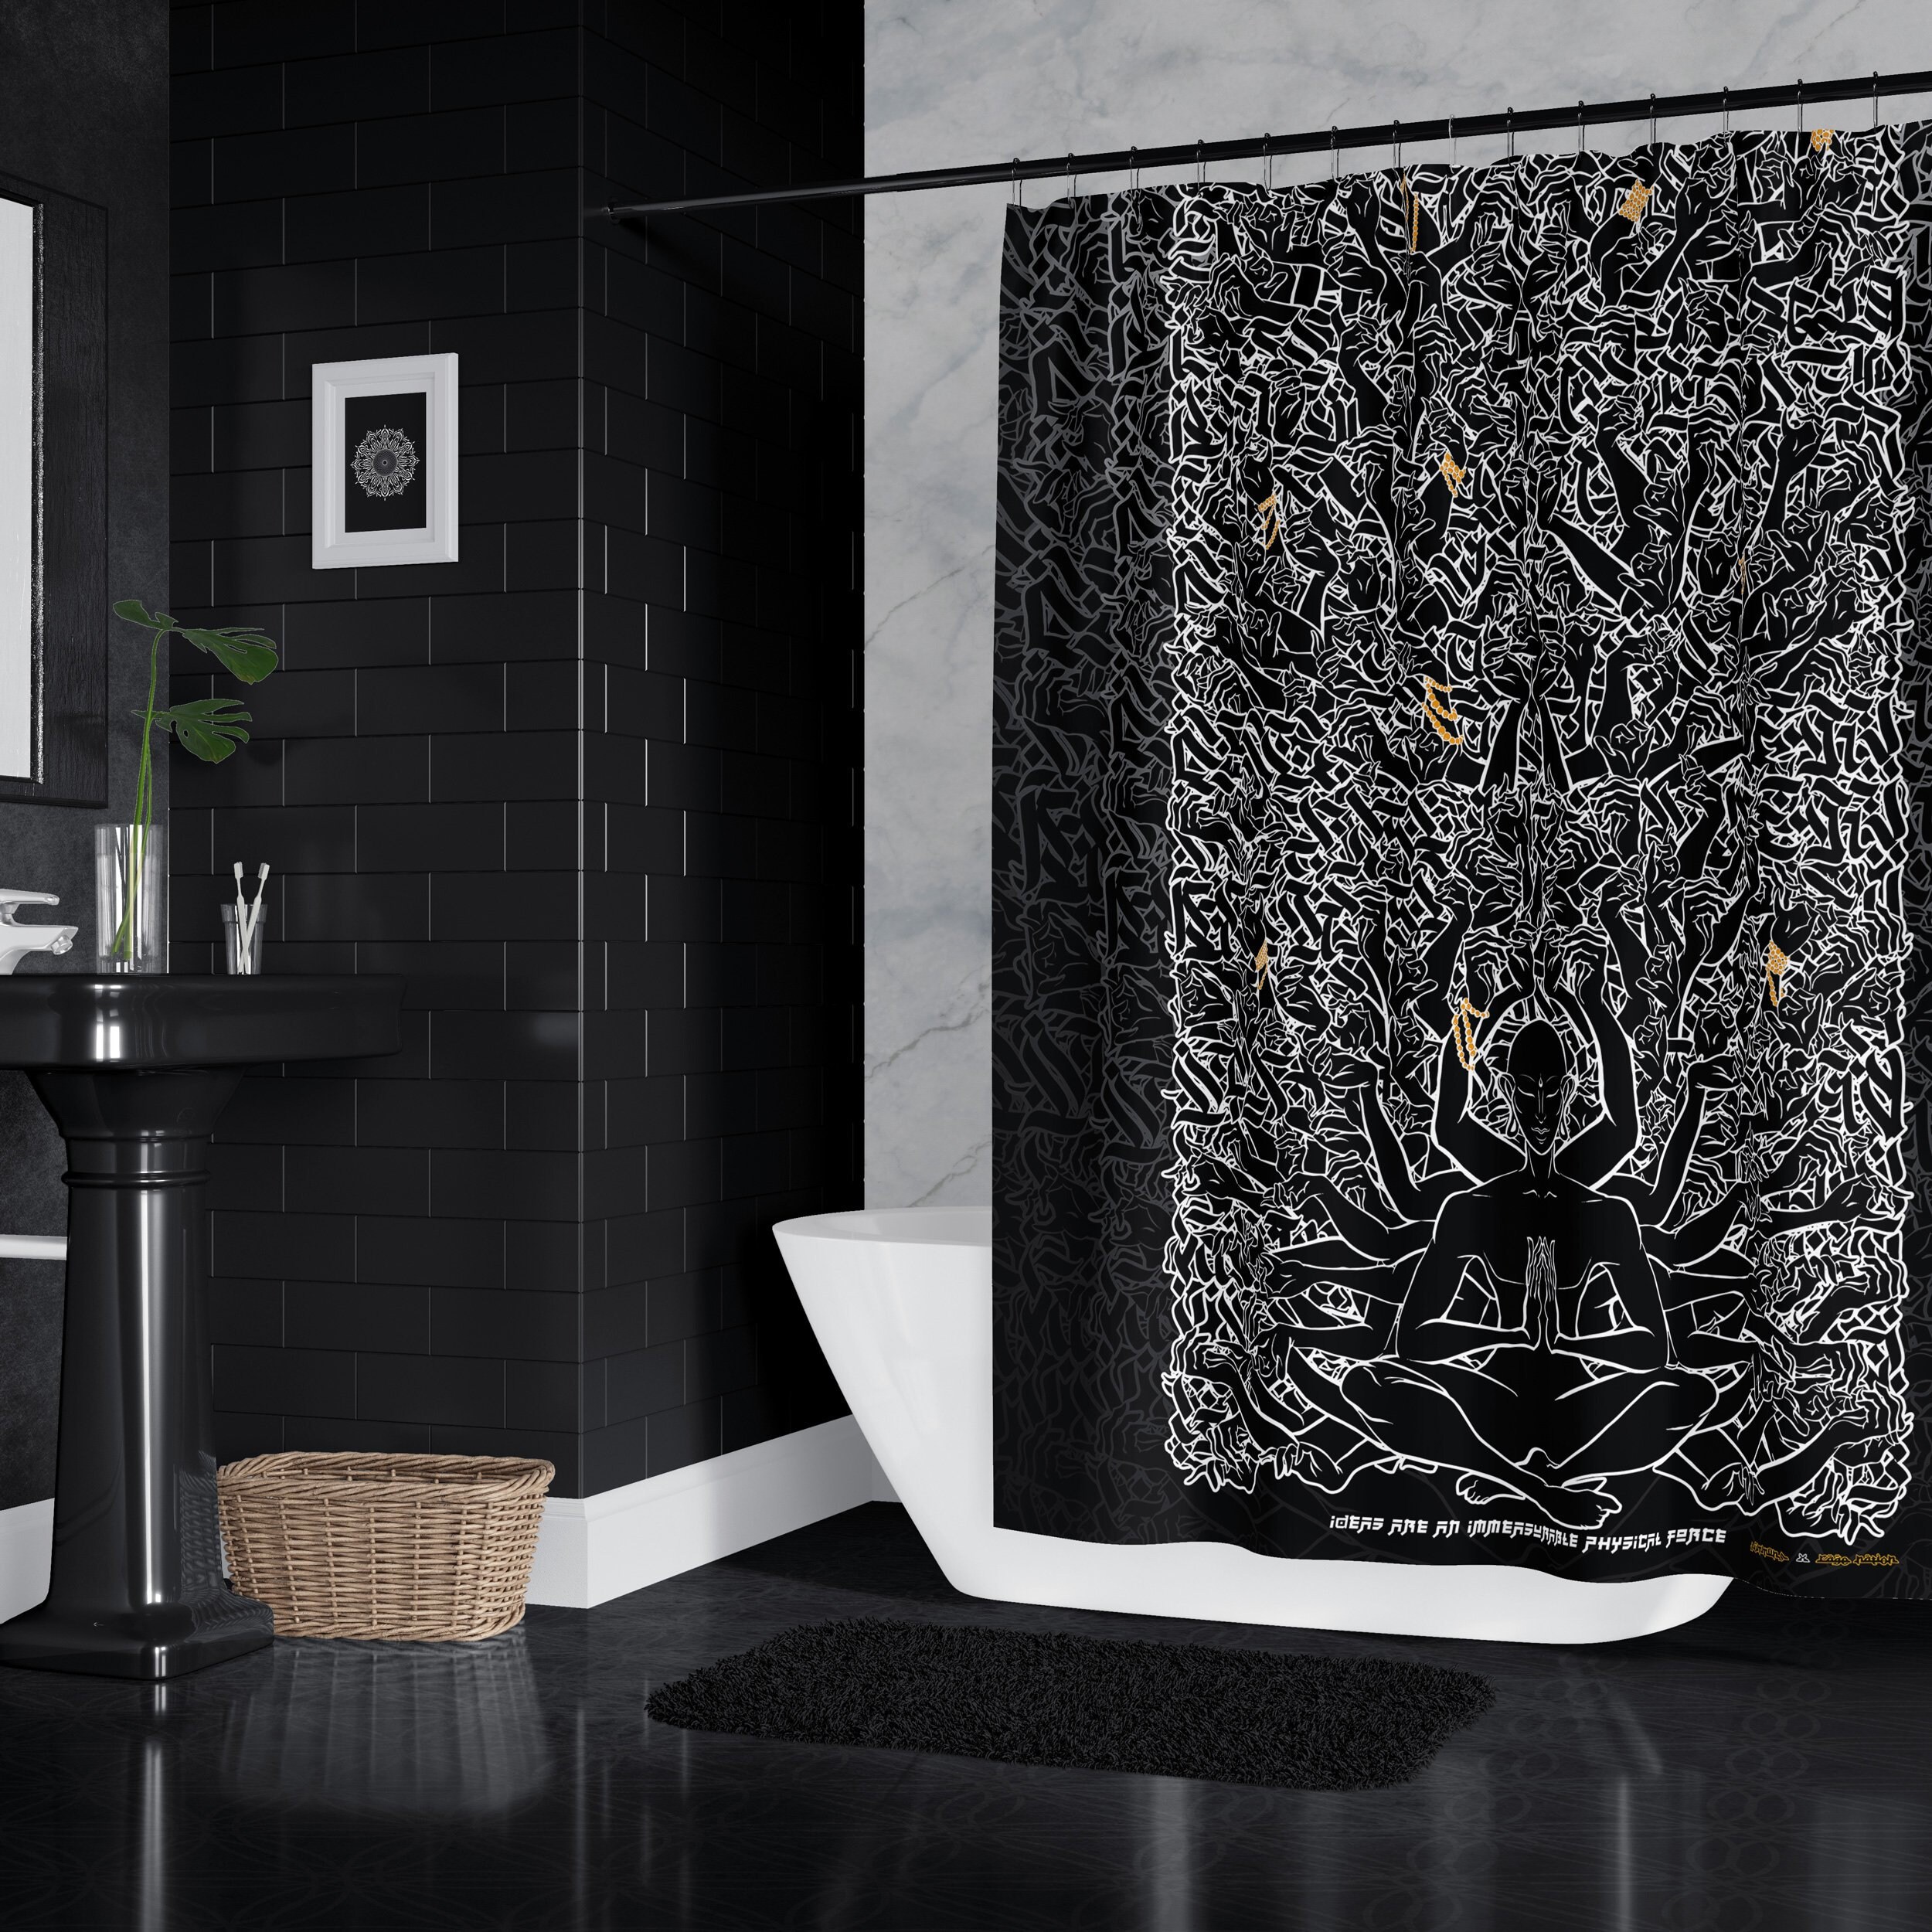 Buy Emvency Shower Curtains 78 x 72 Inches Louis Luxury Geometric